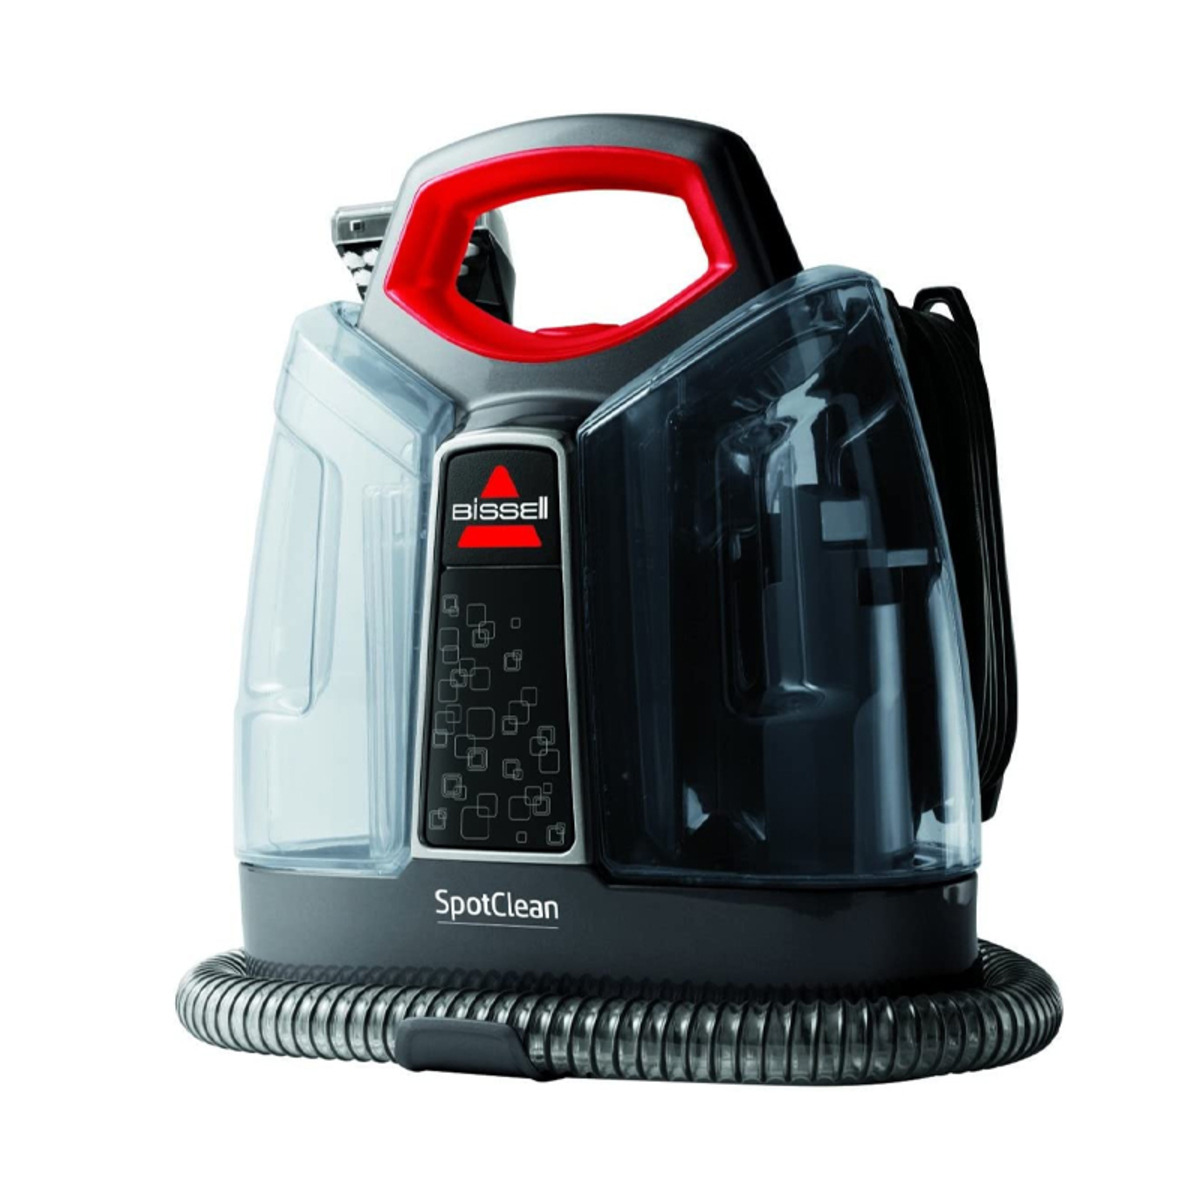 Bissell 36981 SpotClean Portable Carpet Cleaner